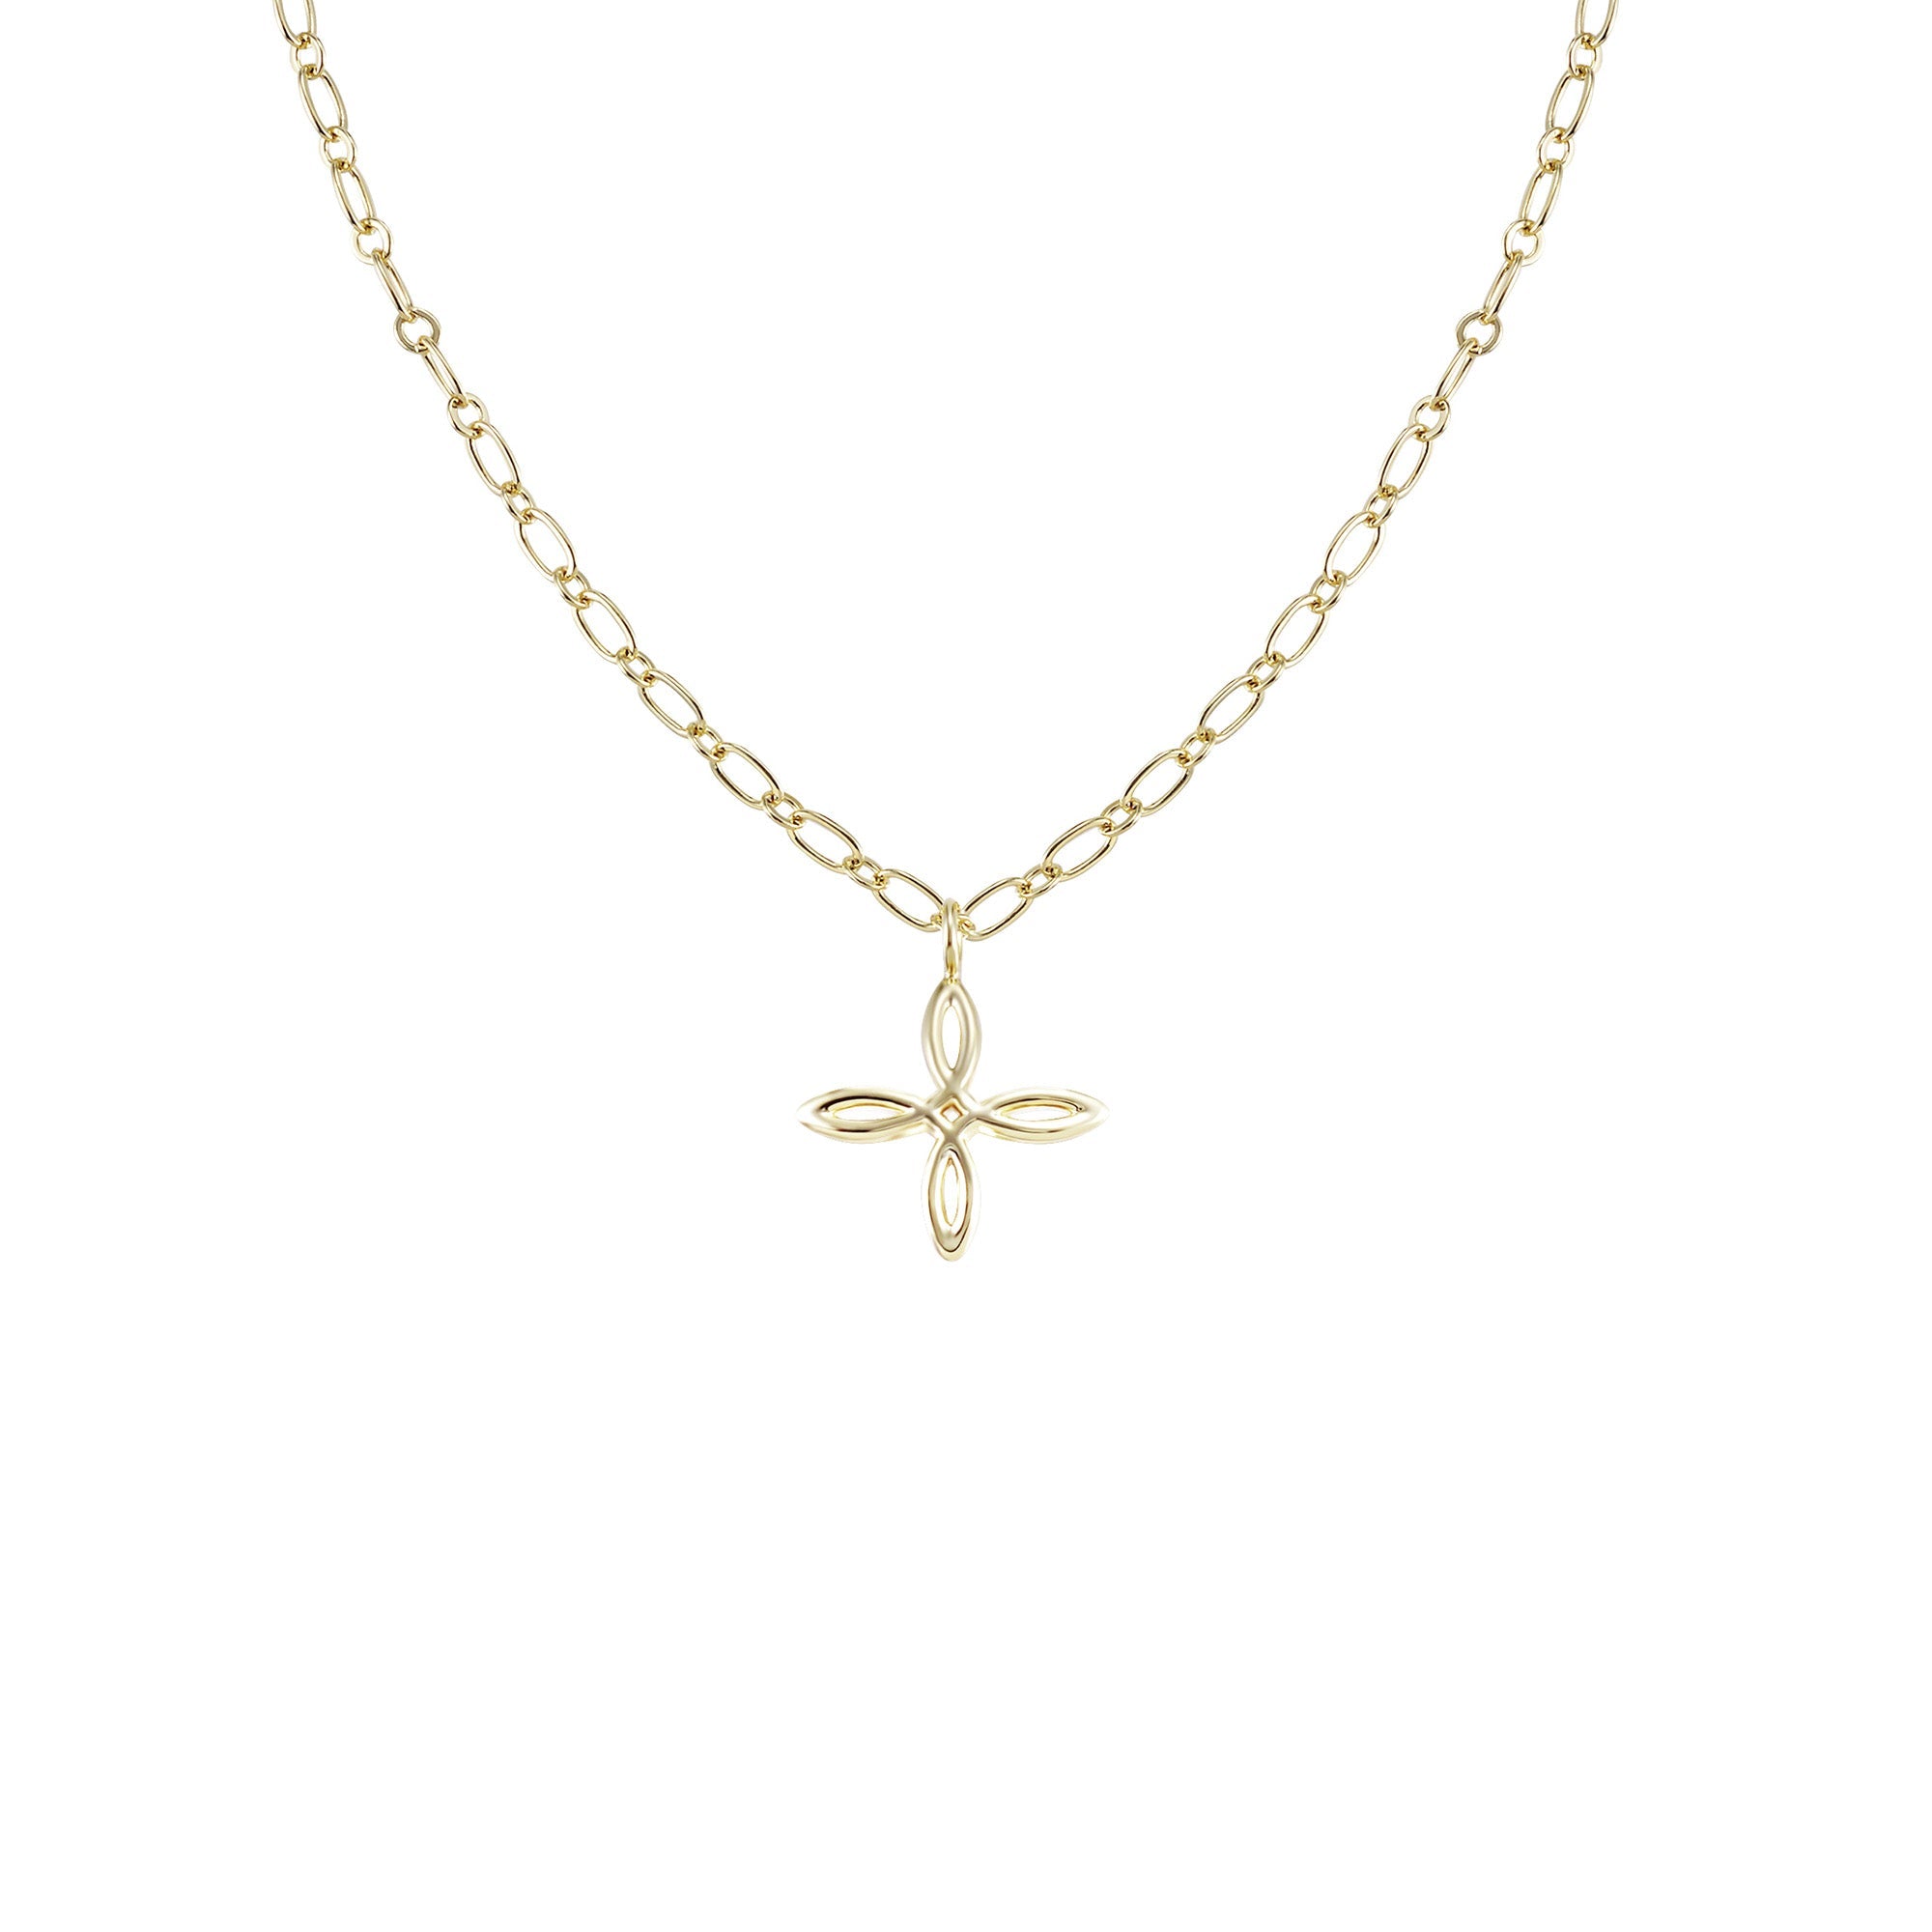 She's Classic Cross Drop Necklace in Gold